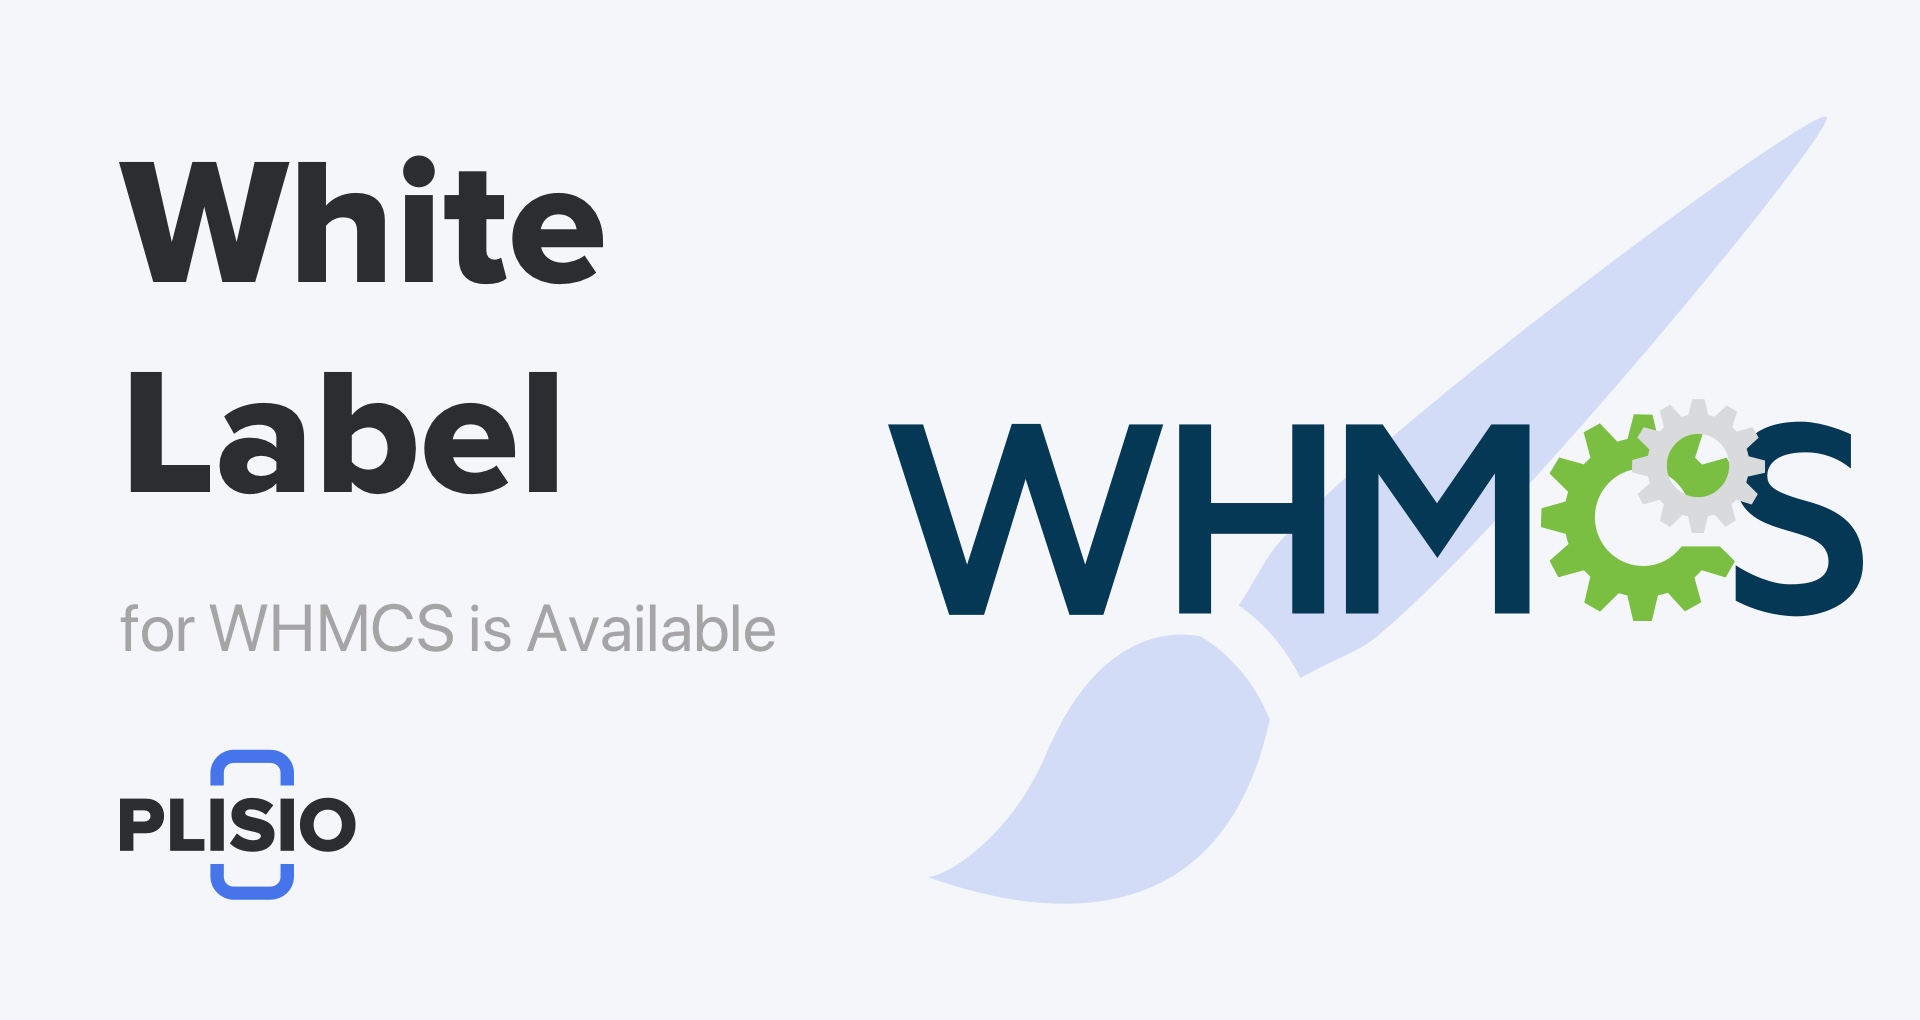 White Label for WHMCS is now available. Give it a try now!